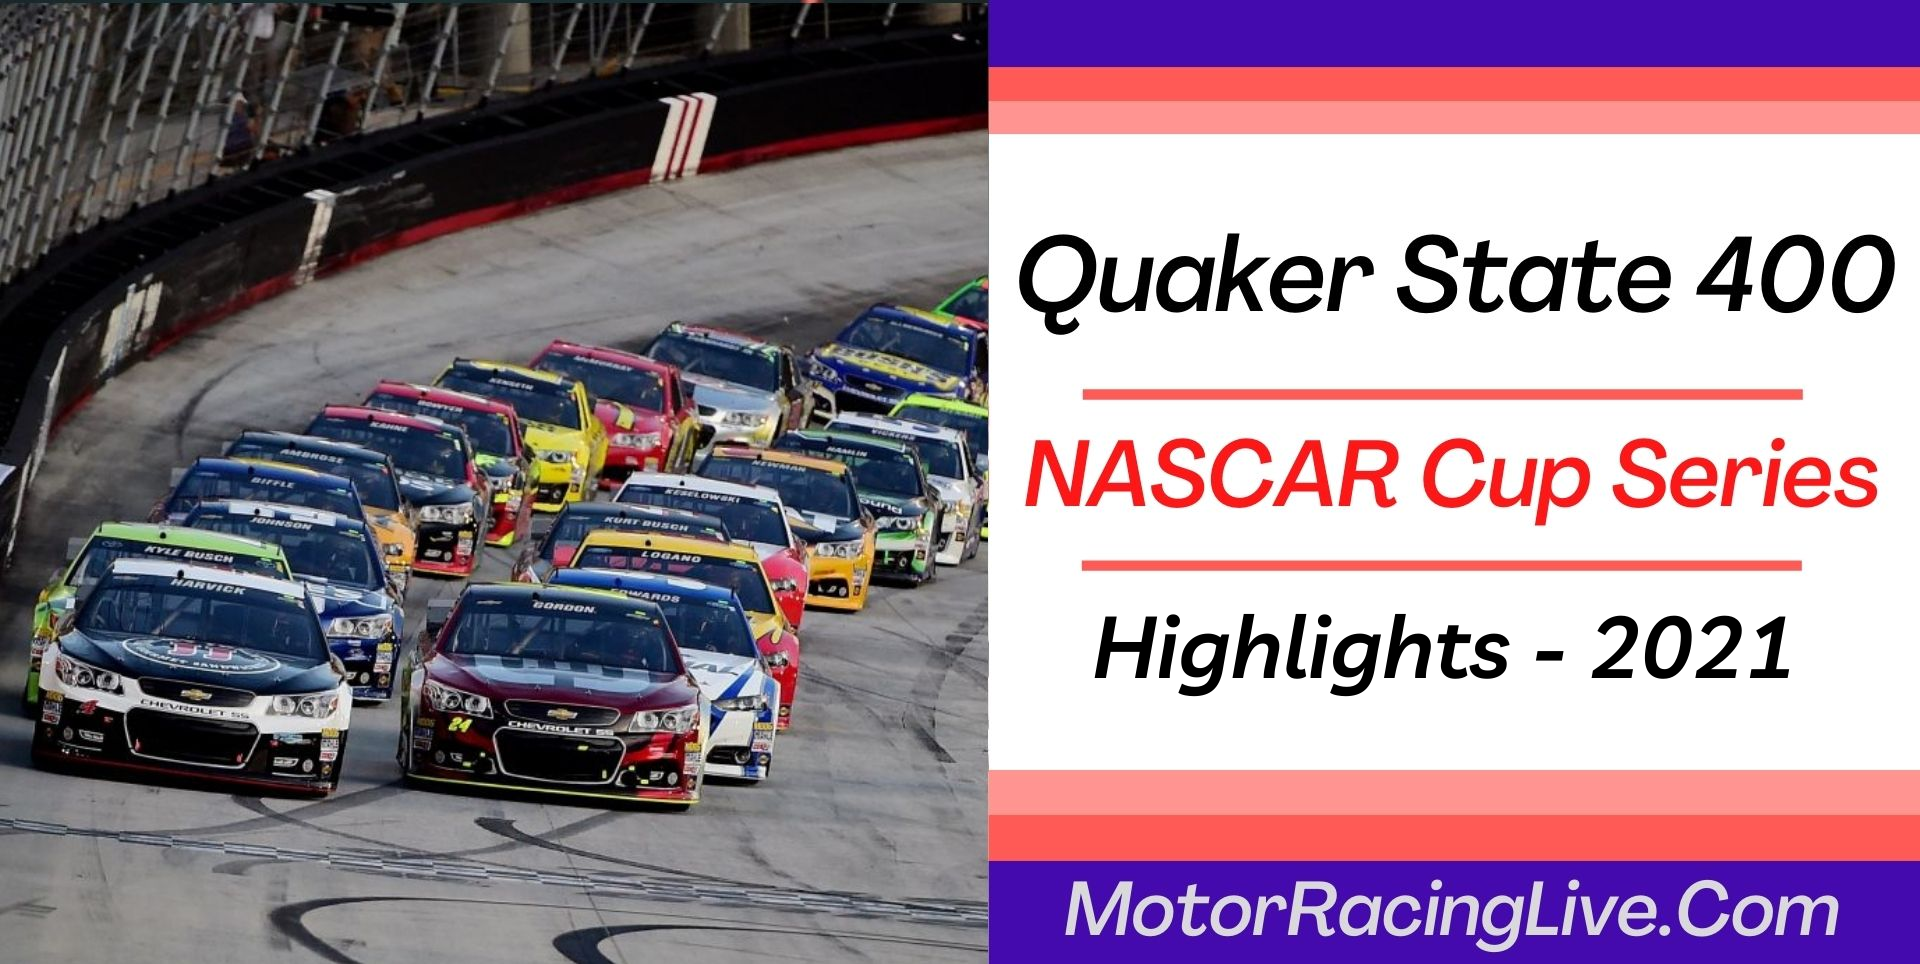 Quaker State 400 NASCAR Cup Series Highlights 2021